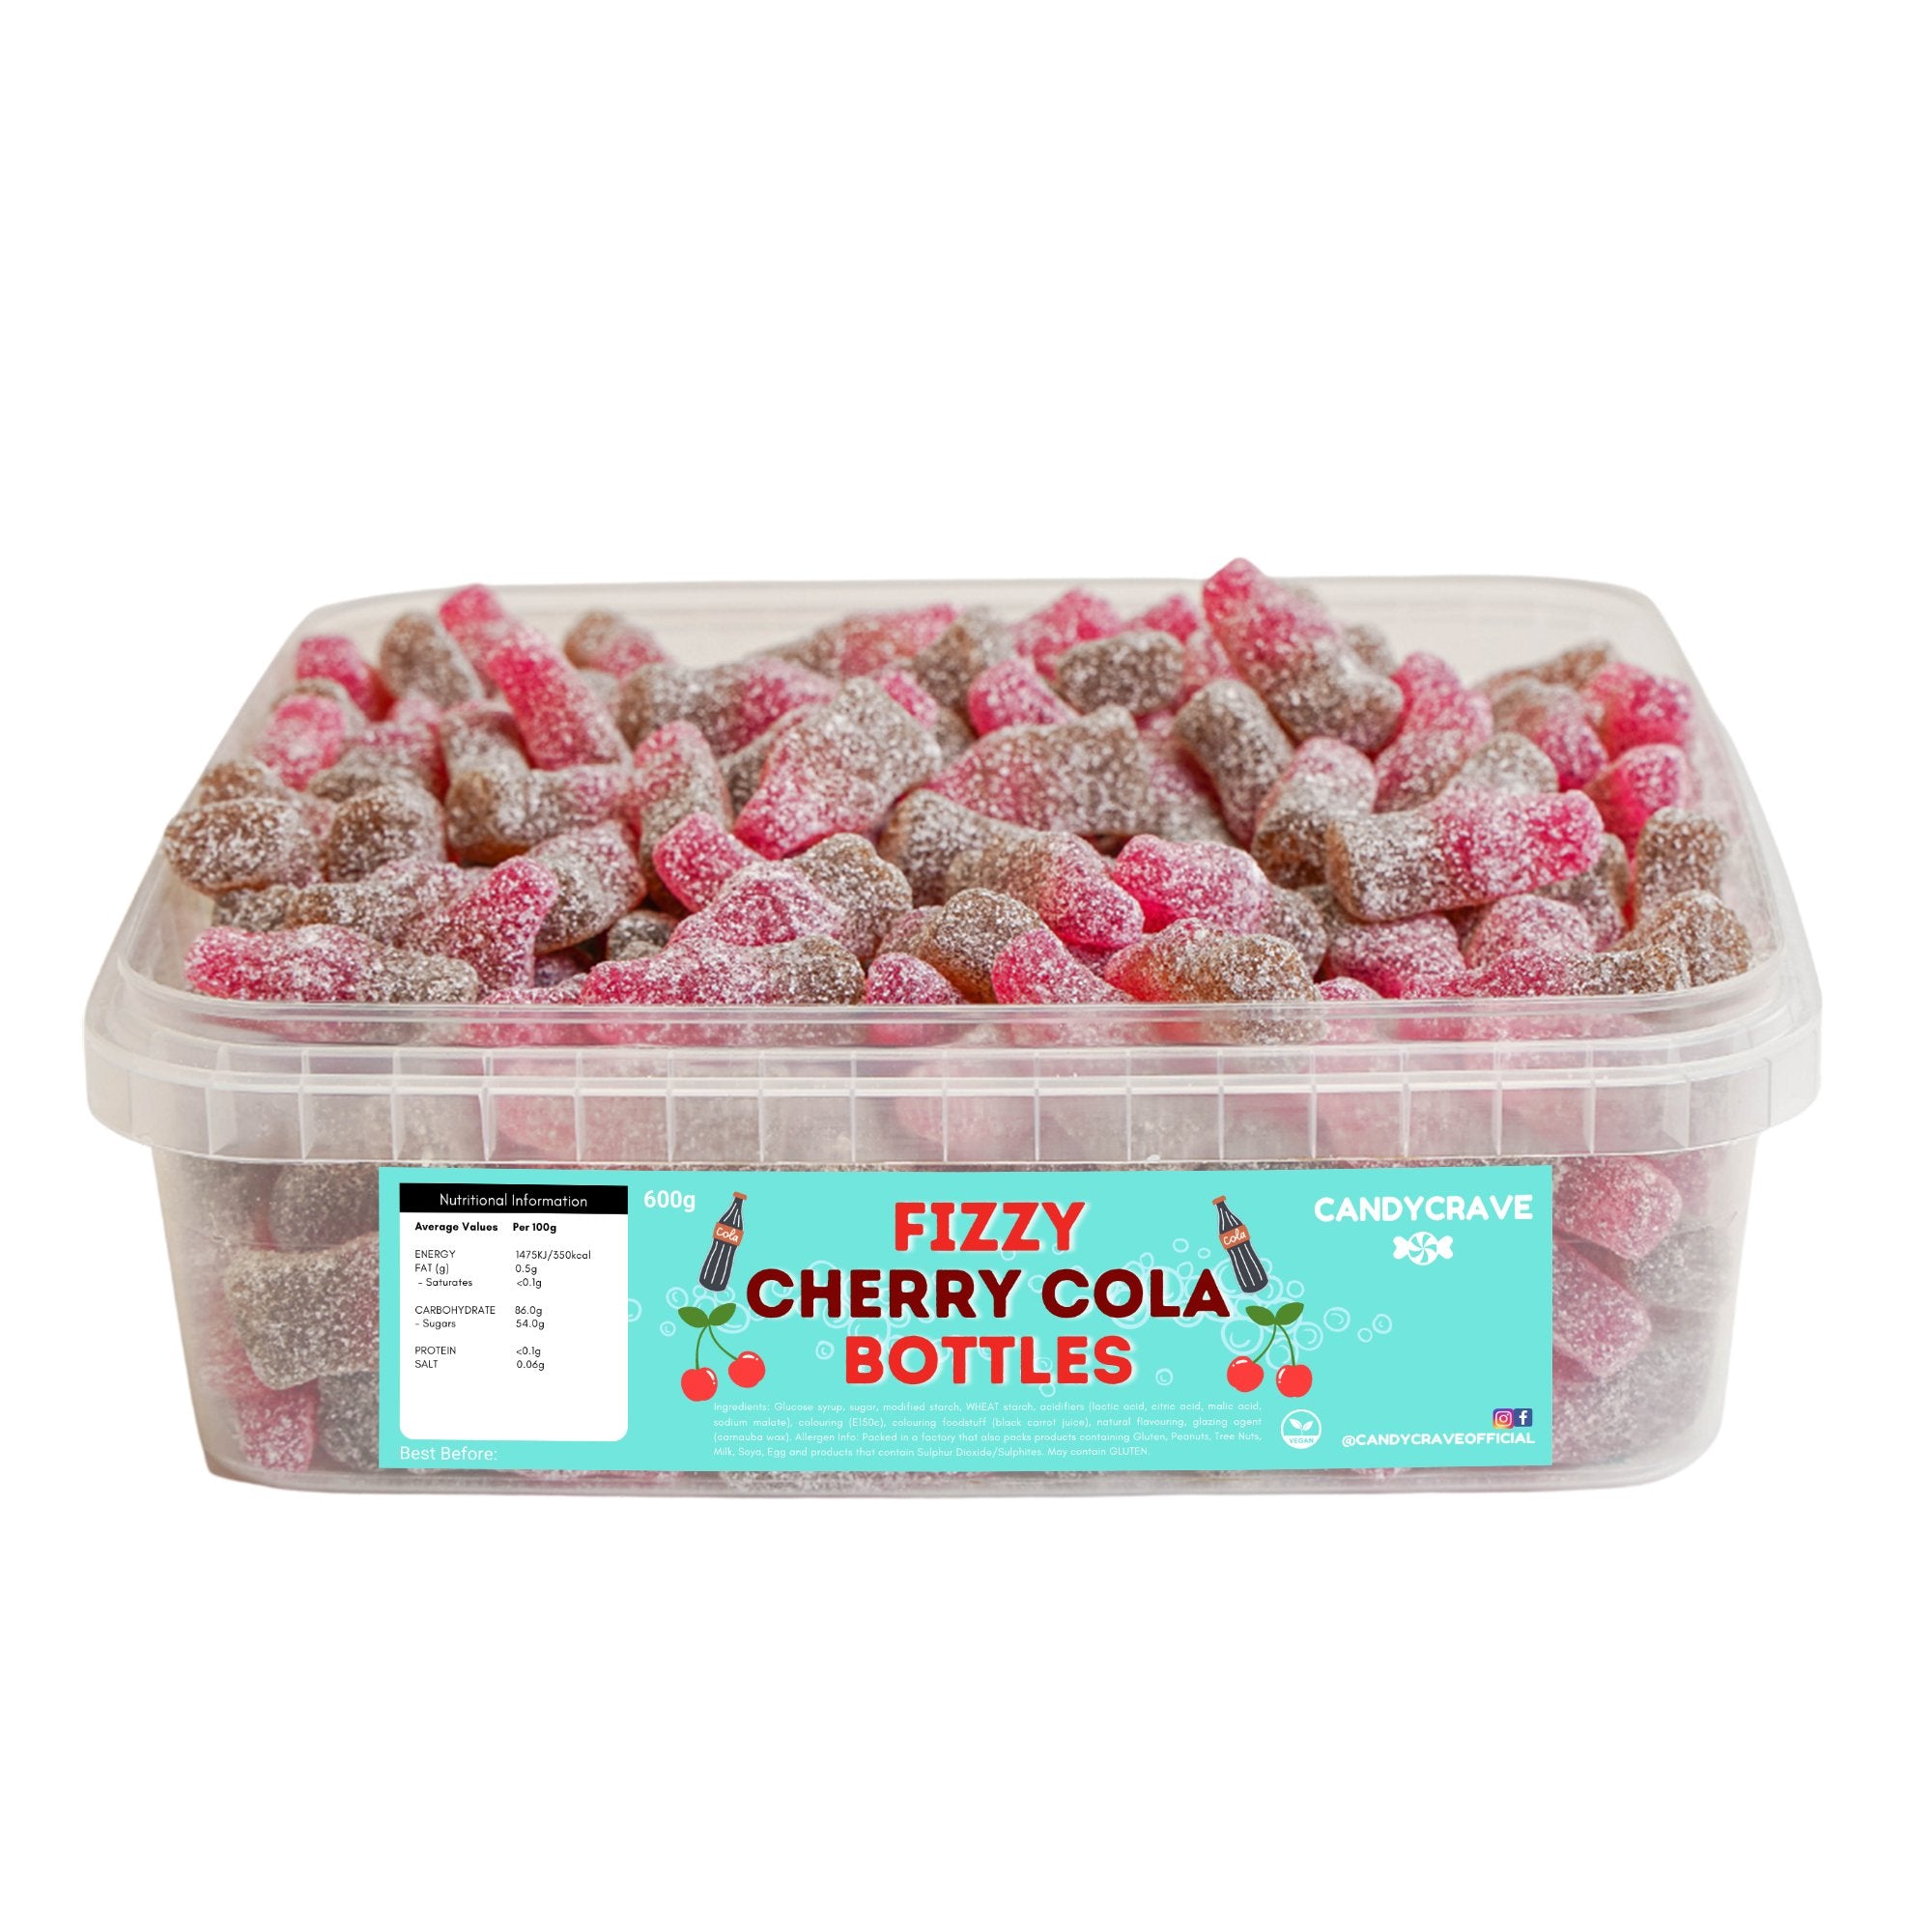 Candy Crave Fizzy Cherry Cola Bottle Tub 600g - Jessica's Sweets